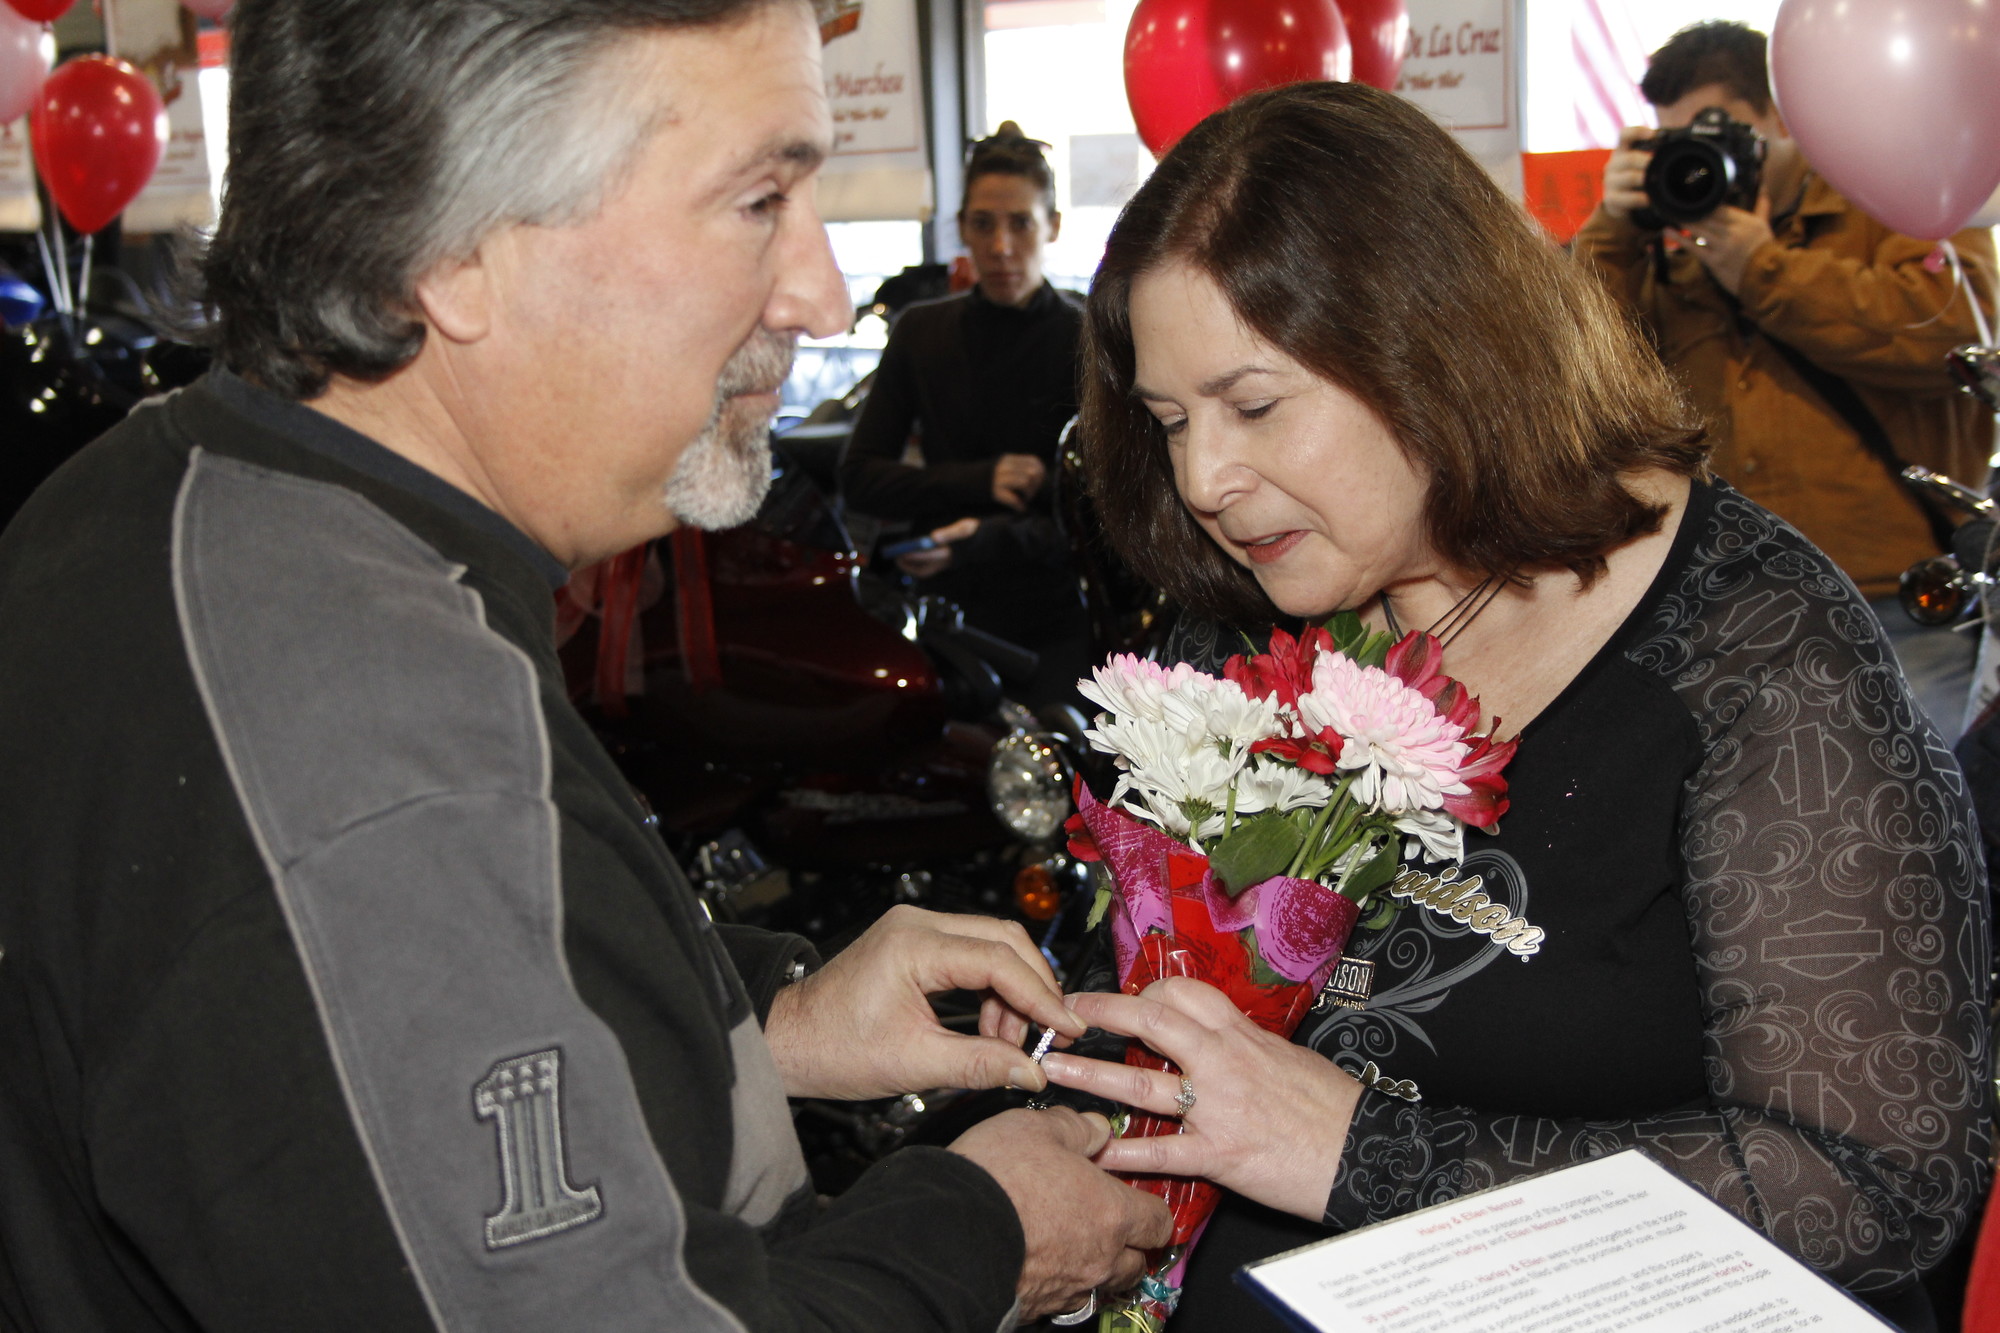 Ellen Nemzer, of Wantagh, placed her husband, Harley’s, wedding ring on his finger during the ceremony.